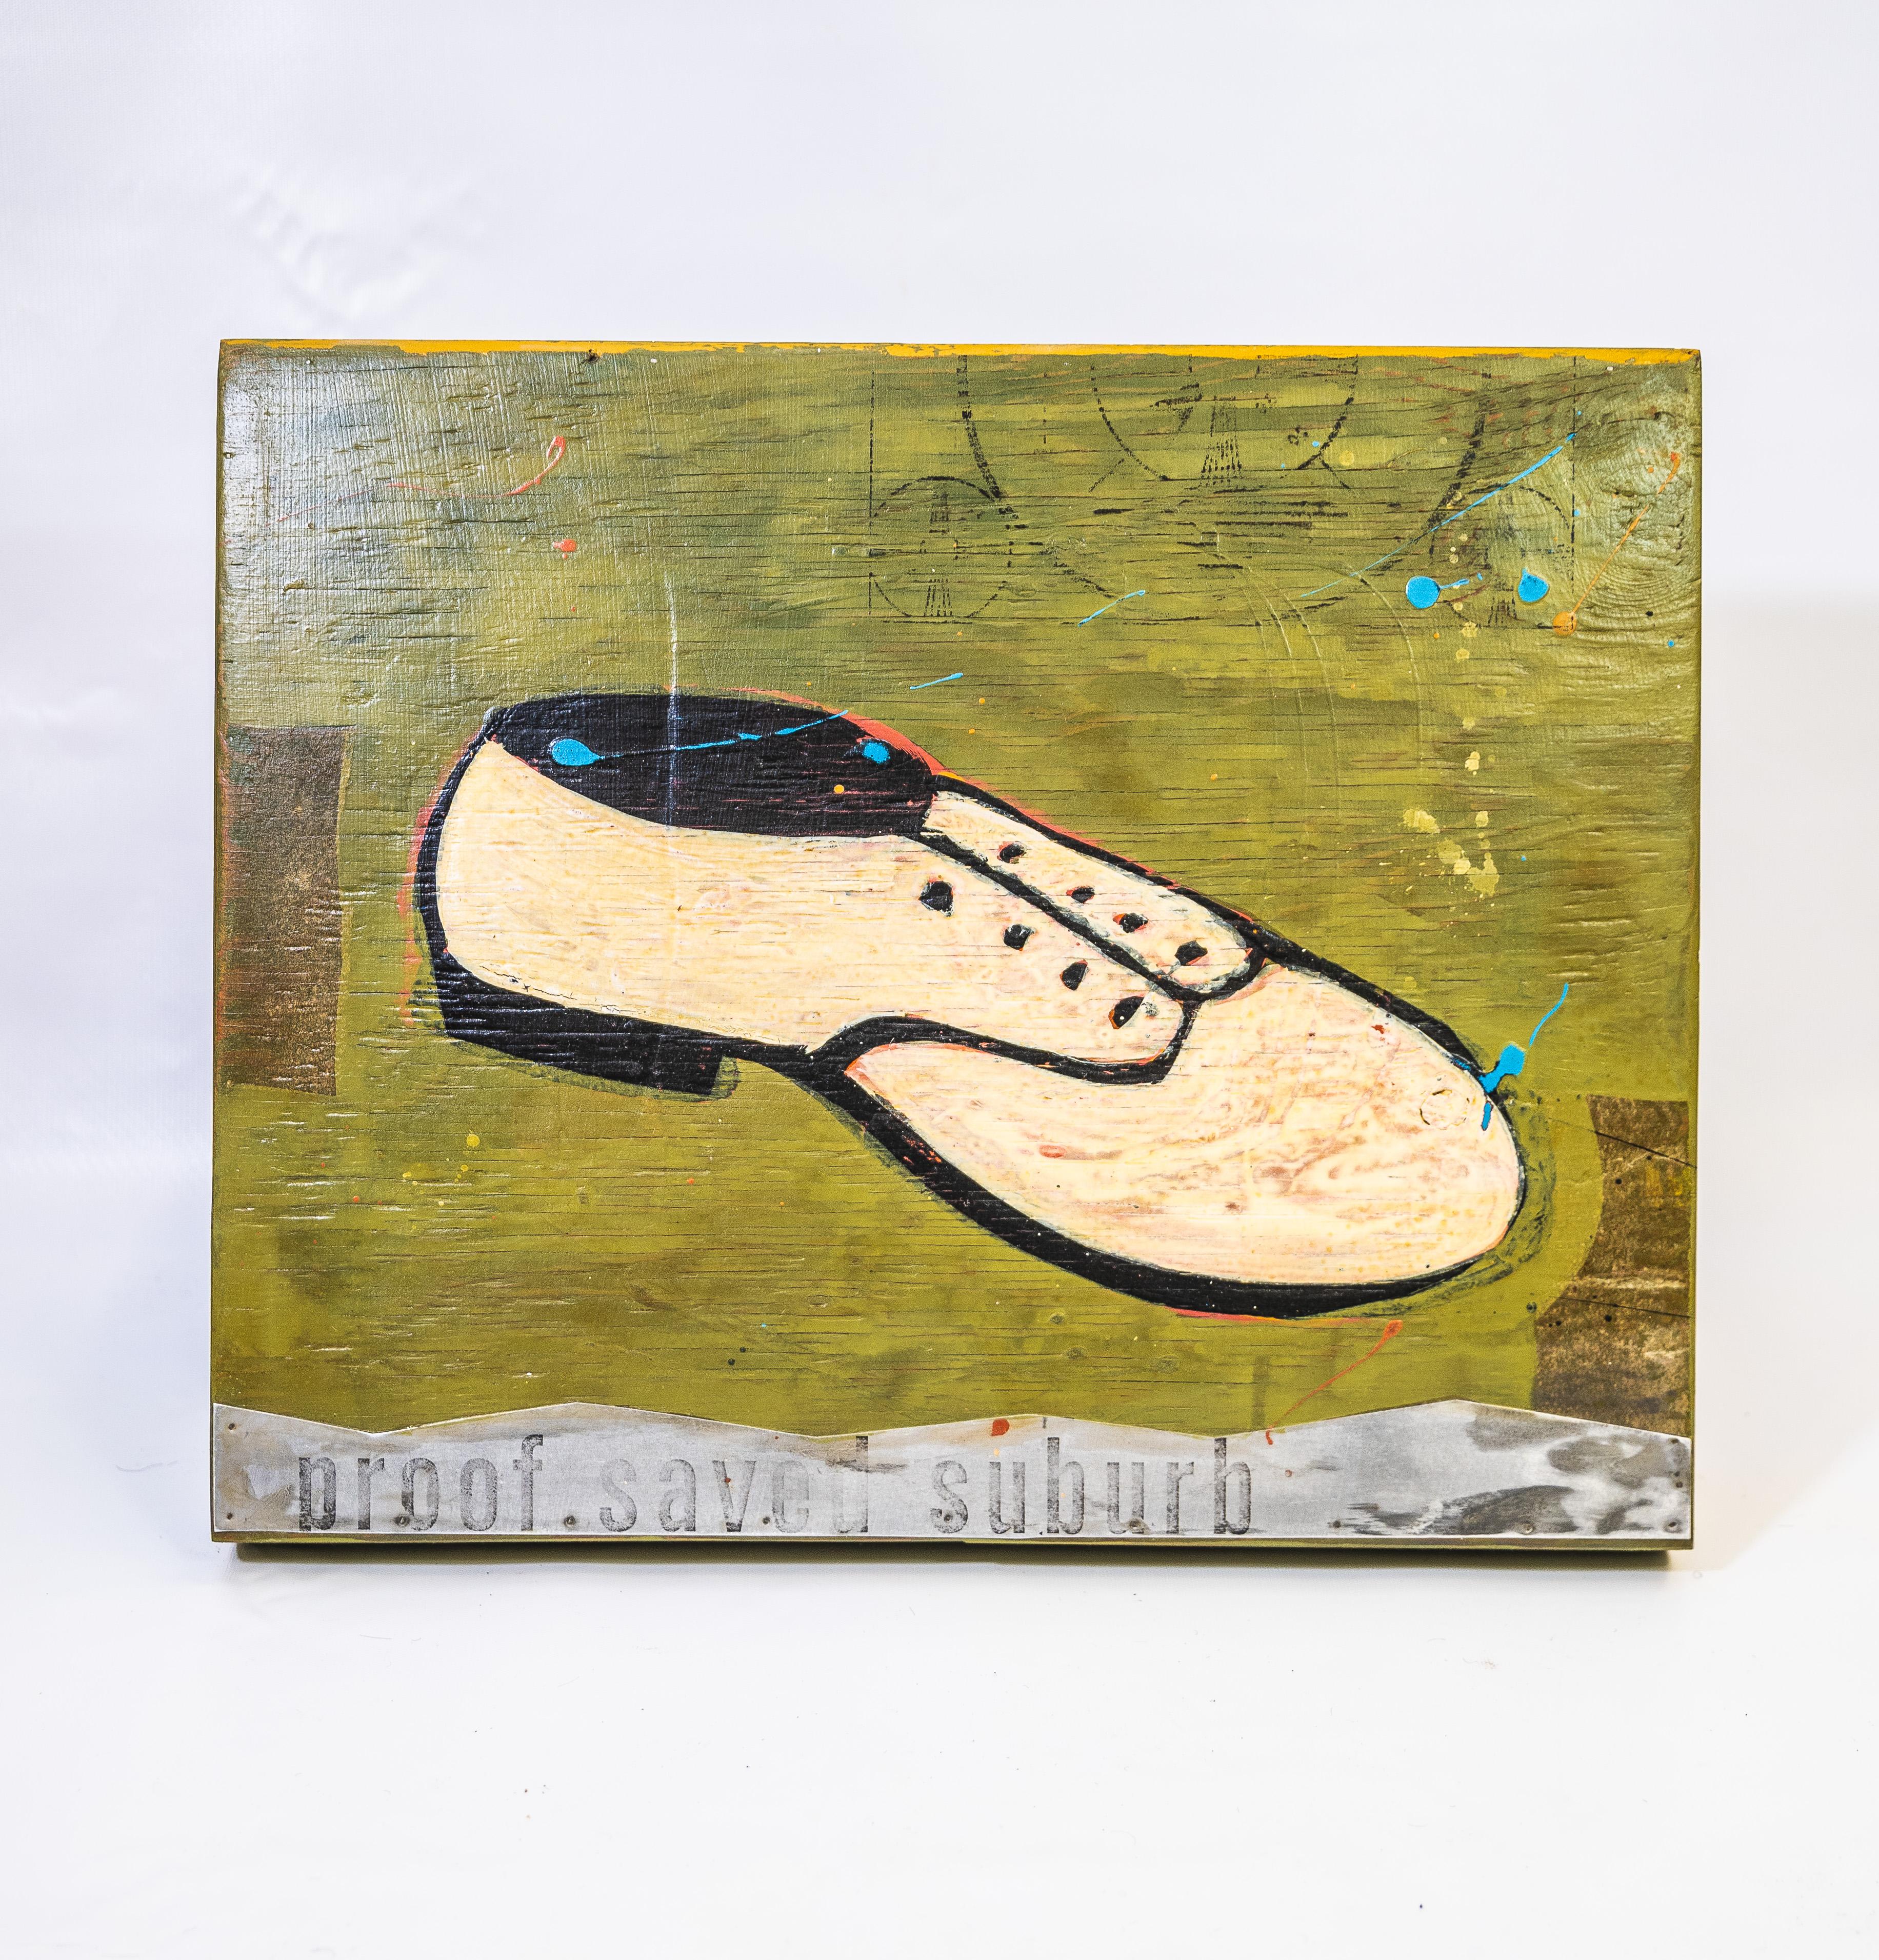 Beige Retro Shoe Painting by John Randall Nelson on wood panel ready to hang signed on verso.

John Randall Nelson is an Arizona-based painter and sculptor. Nelson’s works are layered with his own personal language consisting of patterns, symbols,